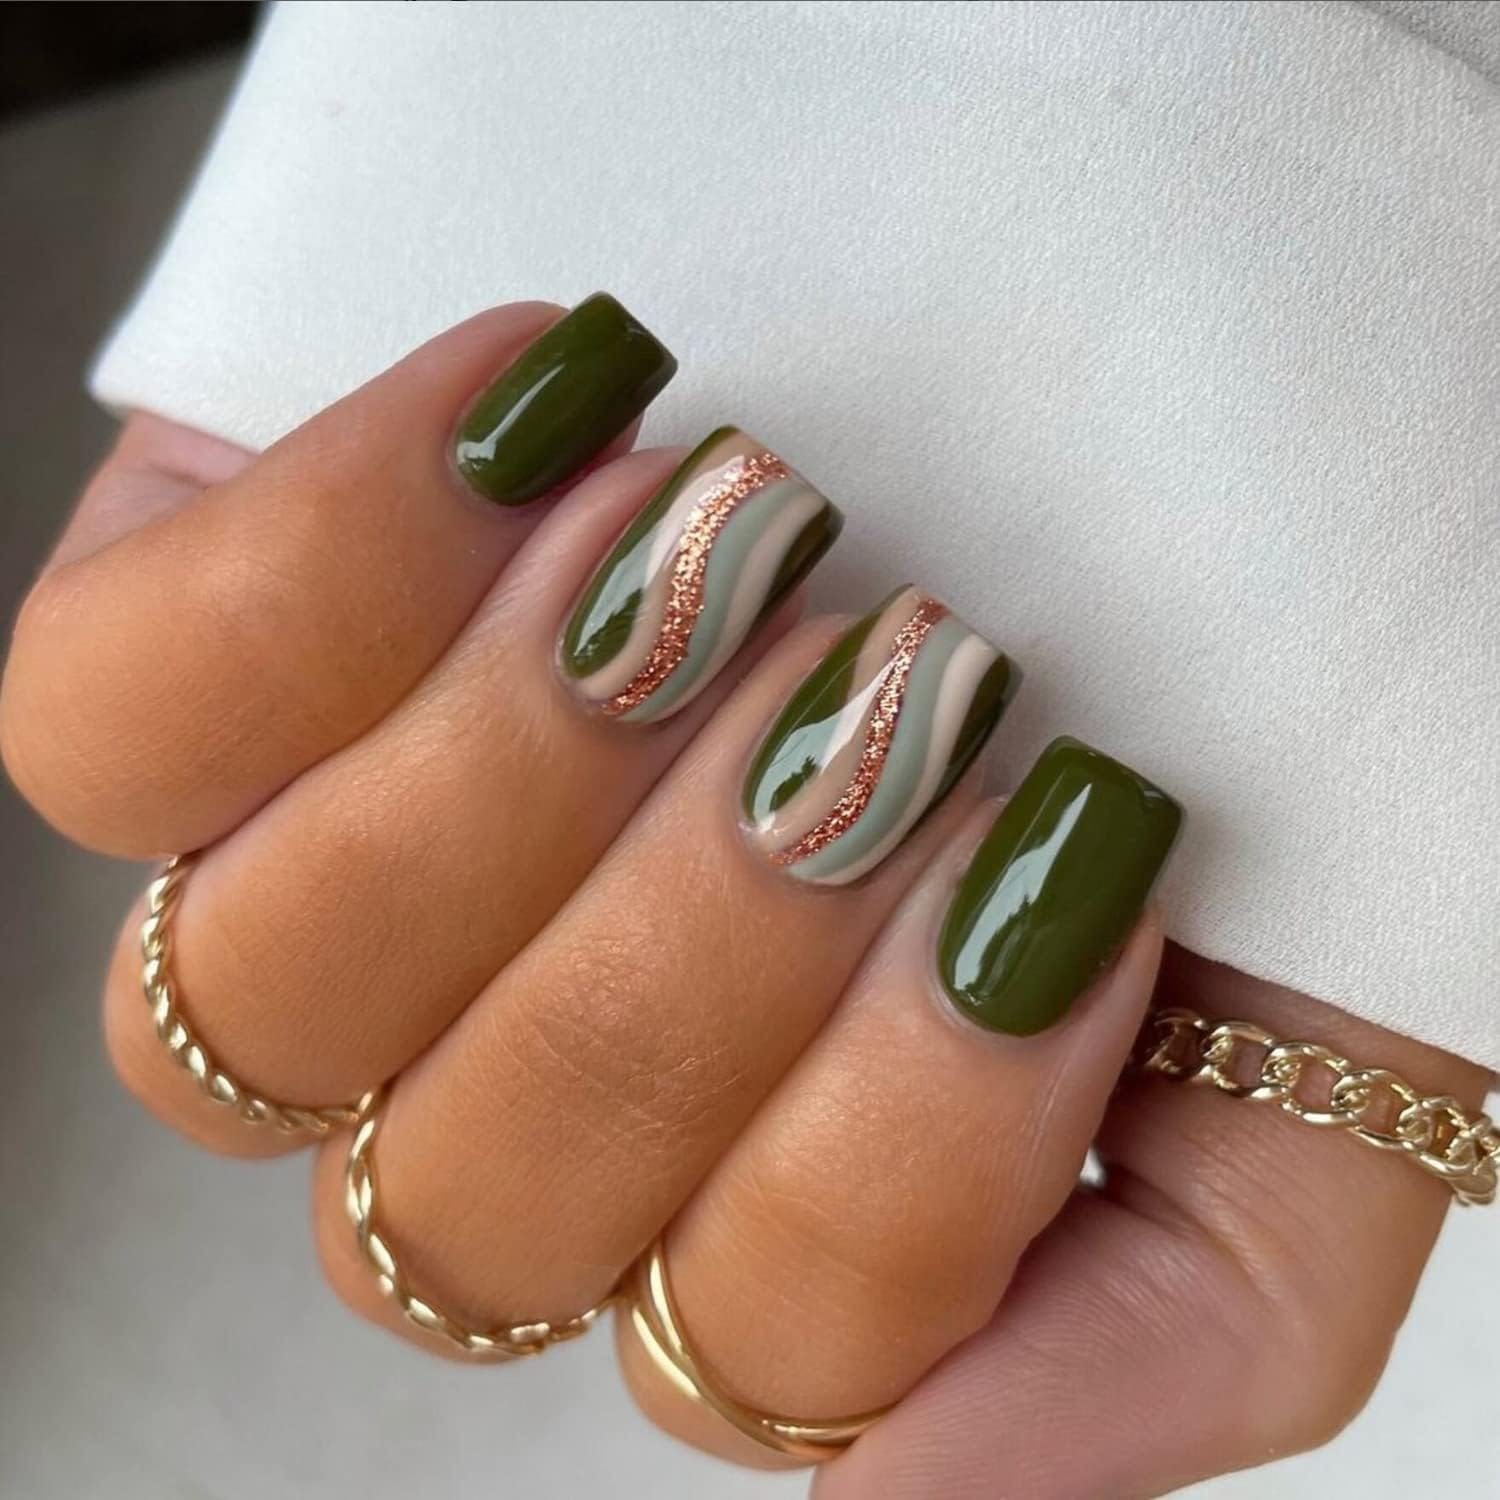 5 Stunning Green Coffin Nails You Need to Try - Nail Art Ideas and Tips